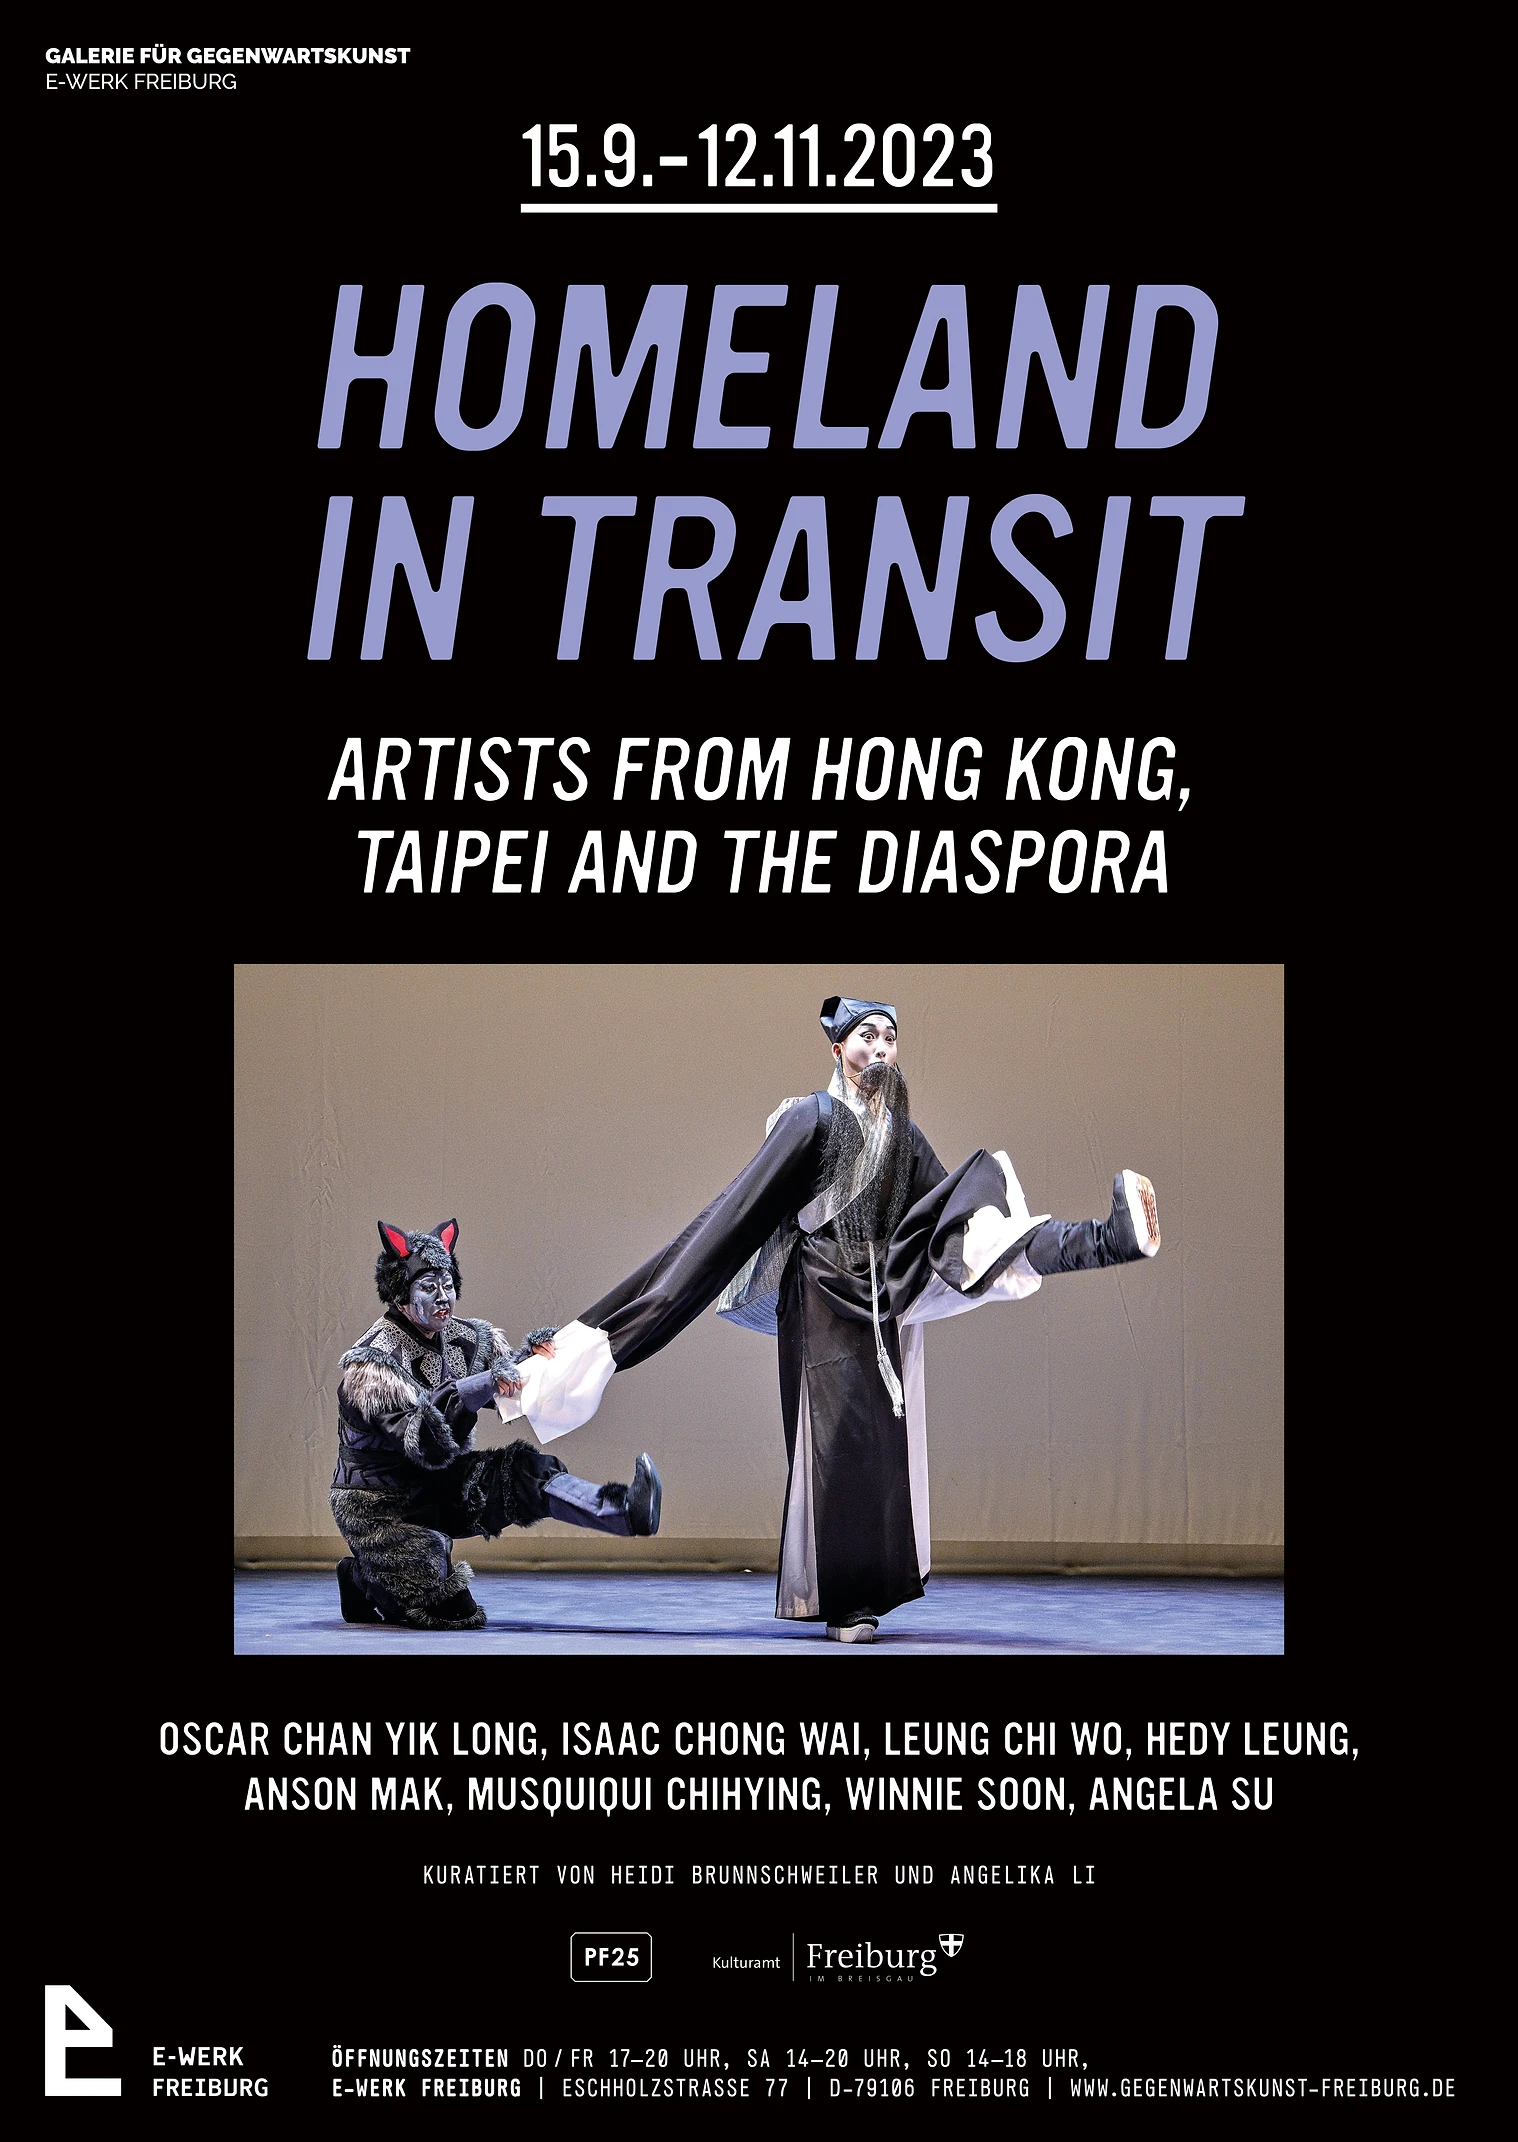 Works by Angela Su, Isaac Chong Wai, and Leung Chi Wo to be featured in group exhibition “Homeland in Transit | Artists from Hong Kong, Taipei and the Diaspora”